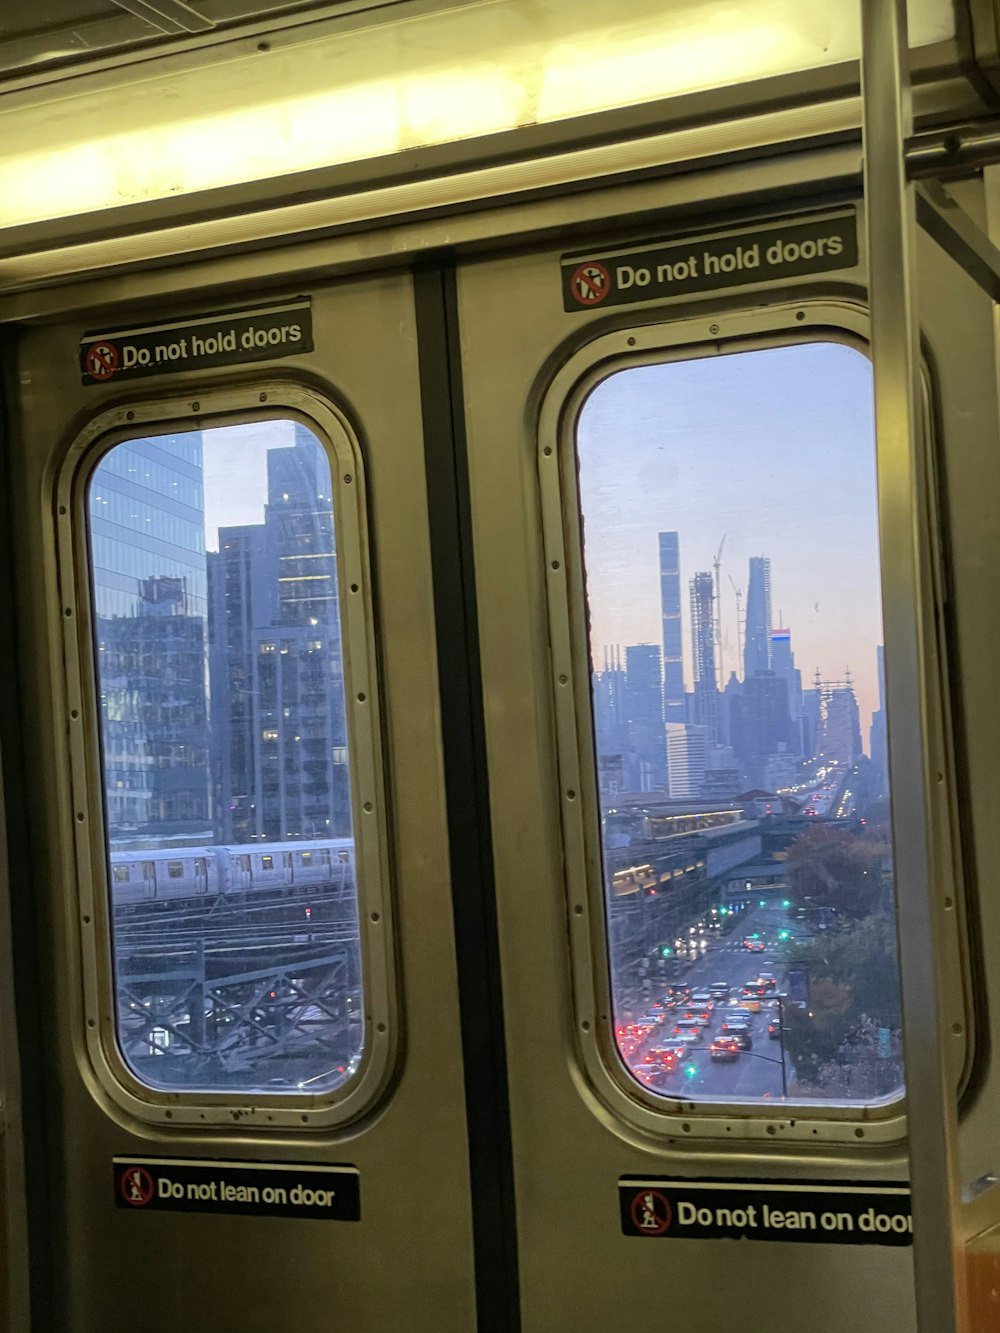 a view of a city from inside a train